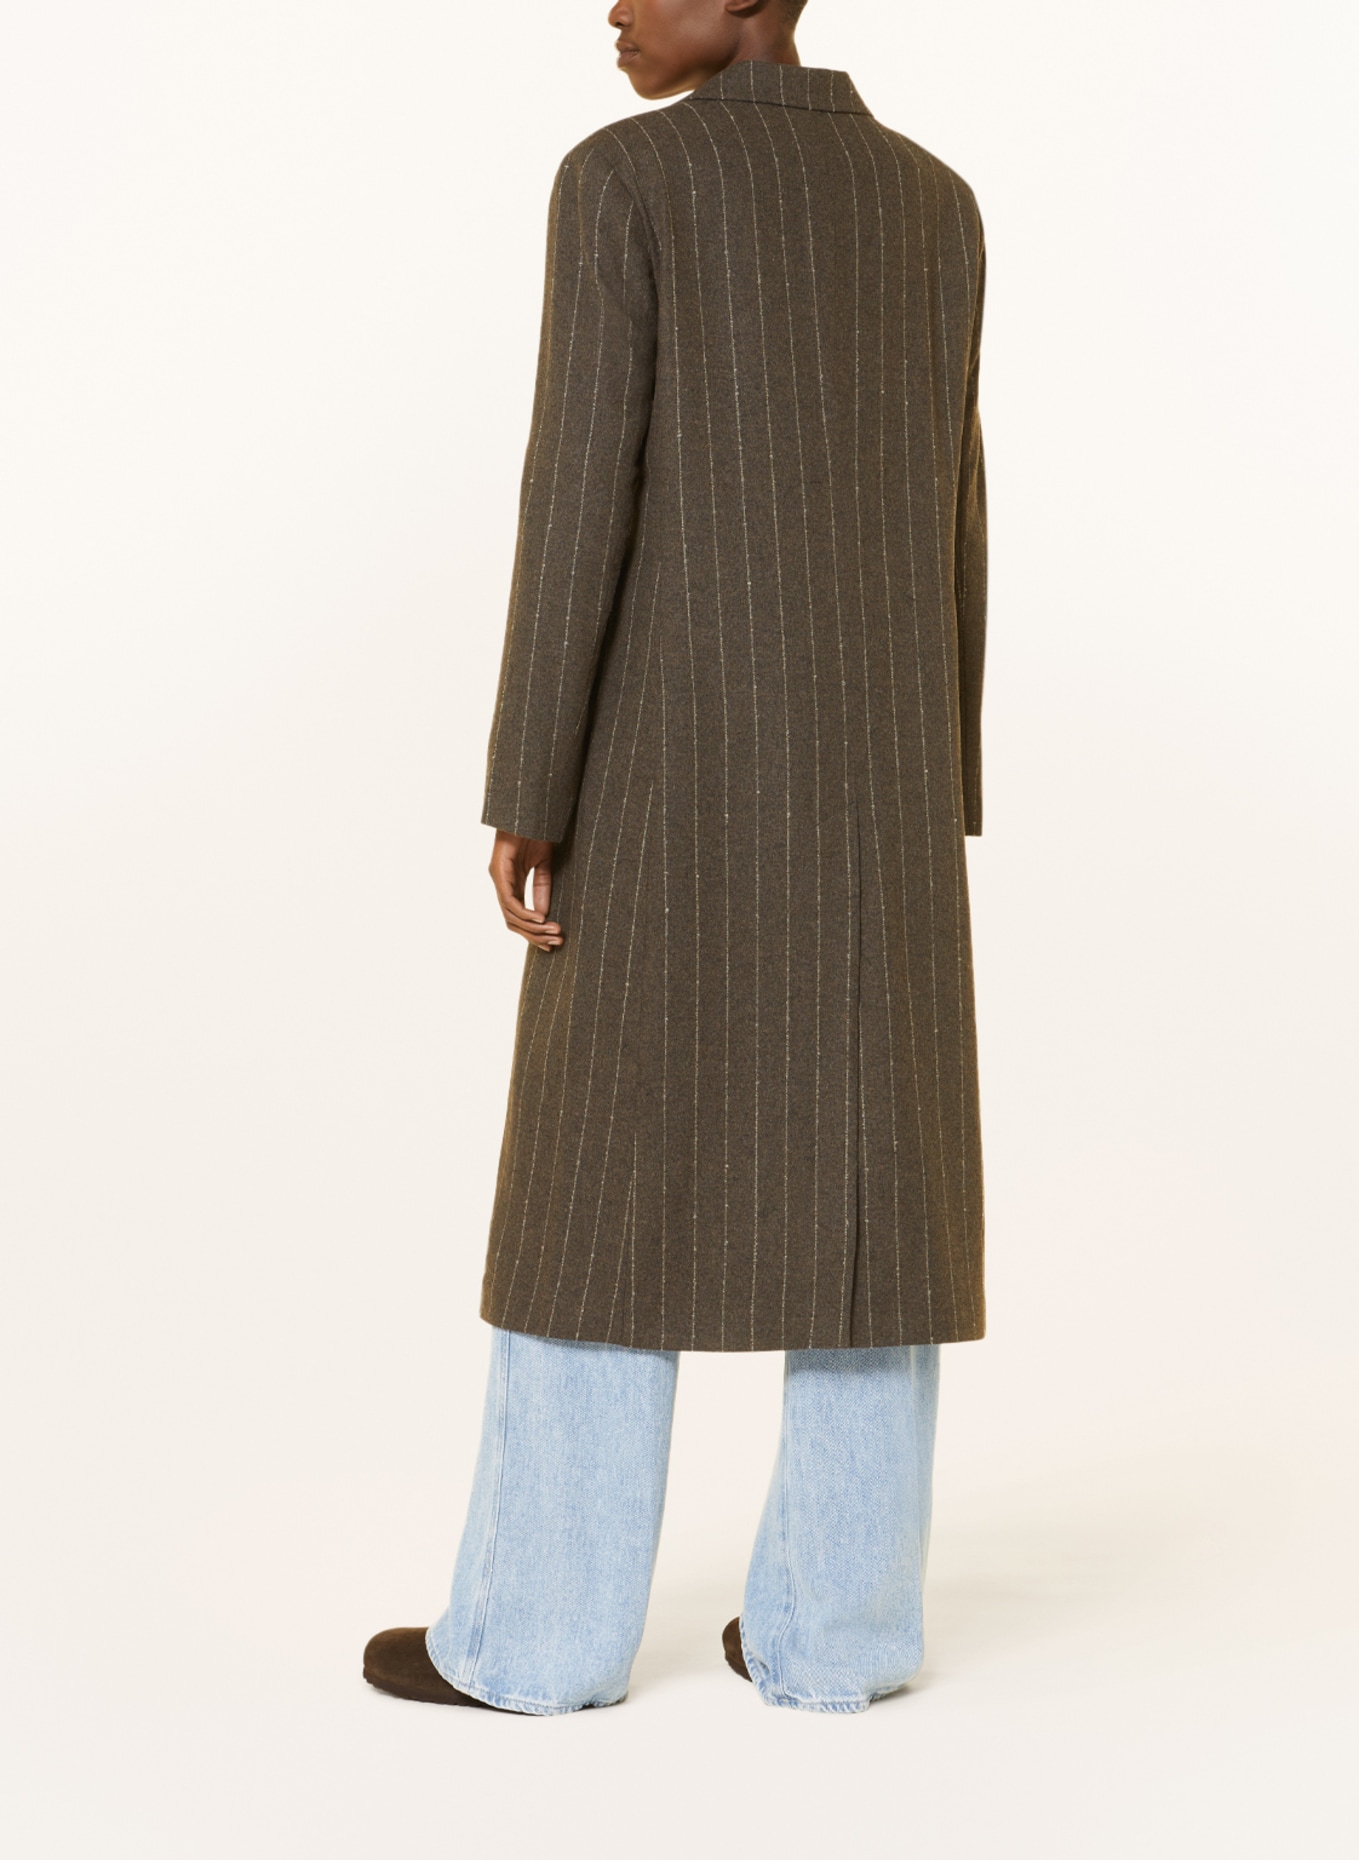 REMAIN Wool coat, Color: GRAY/ LIGHT GRAY (Image 3)